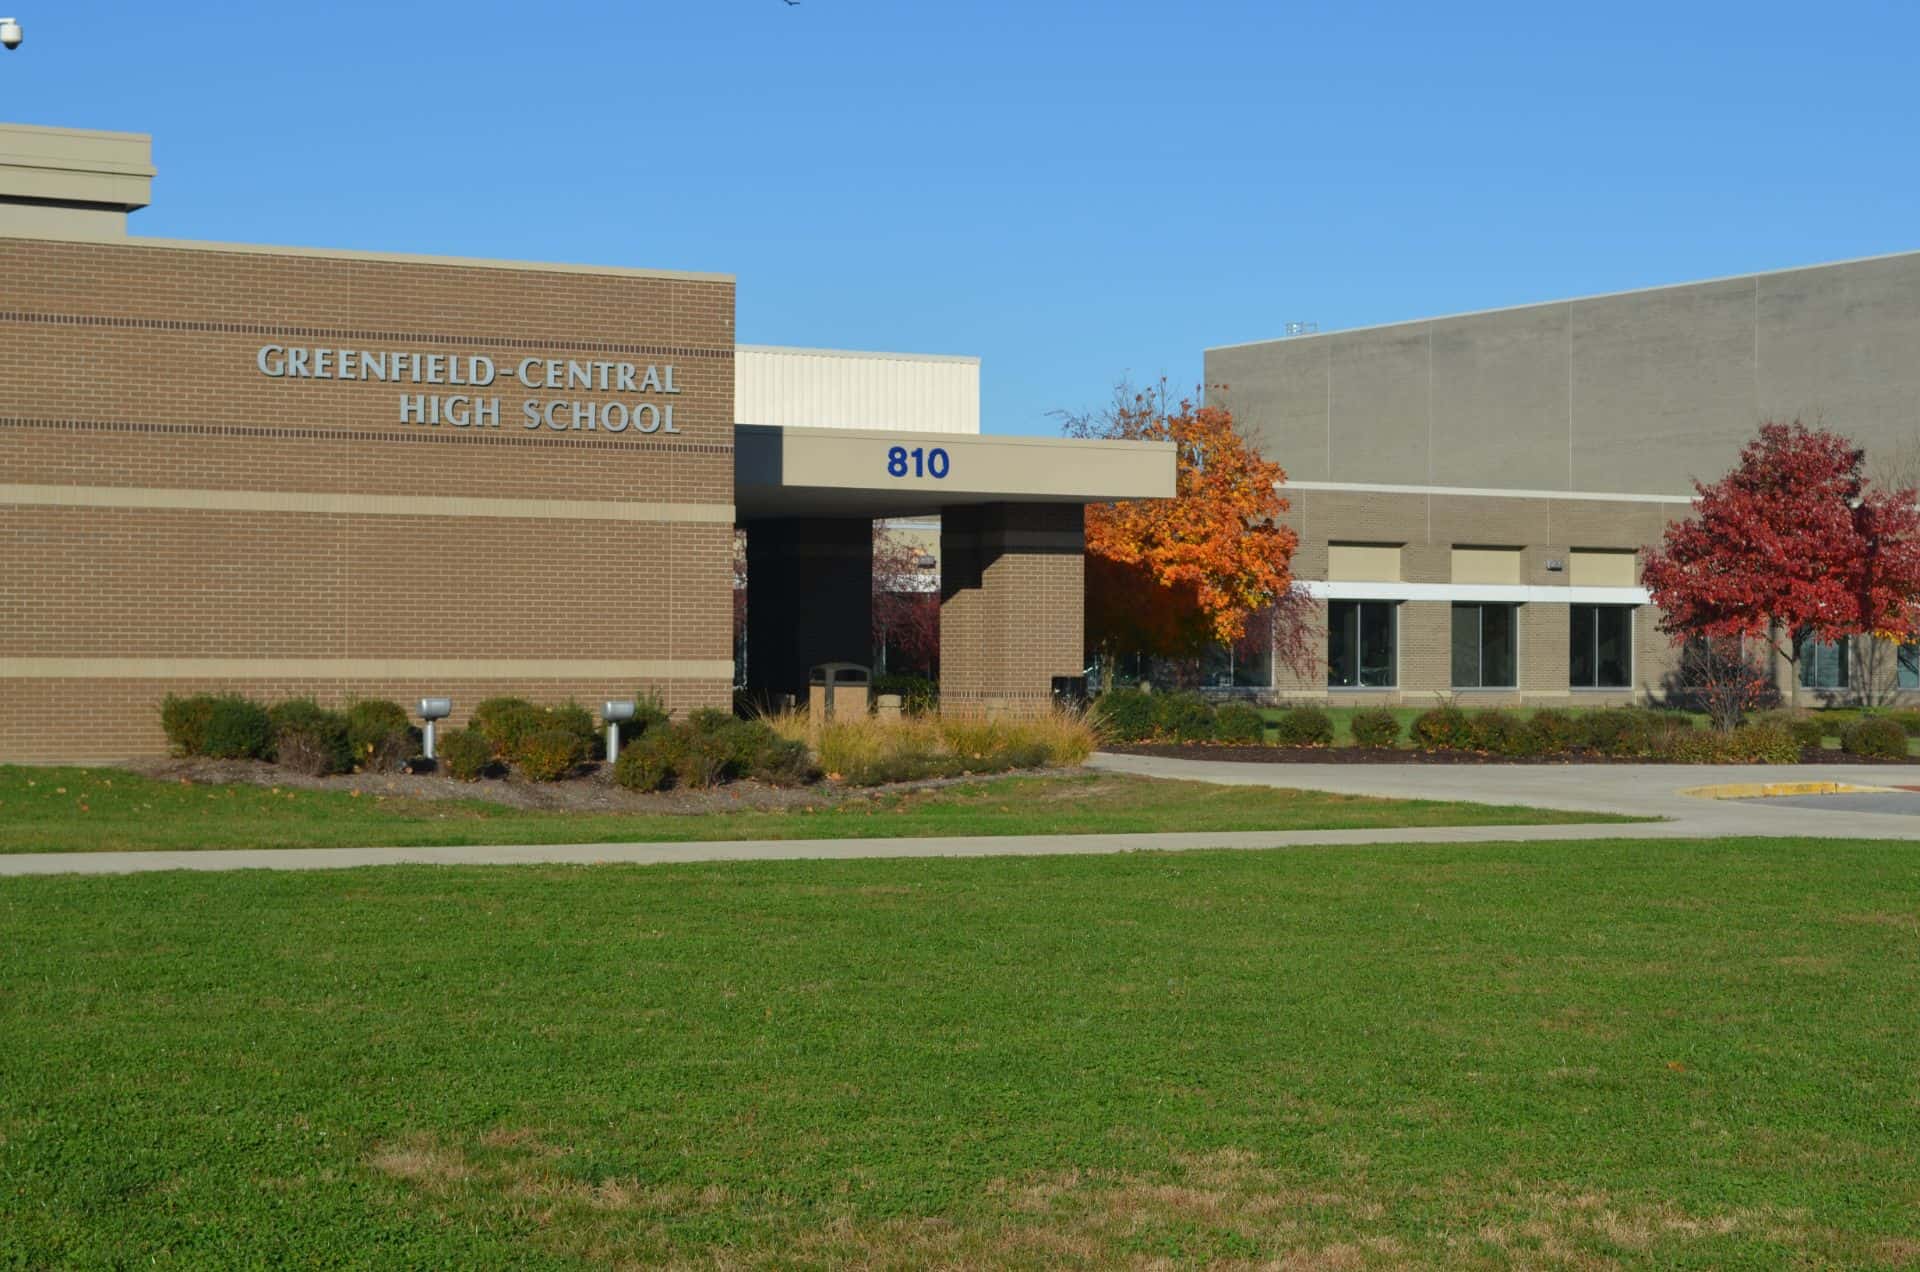 Greenfield-Central High School